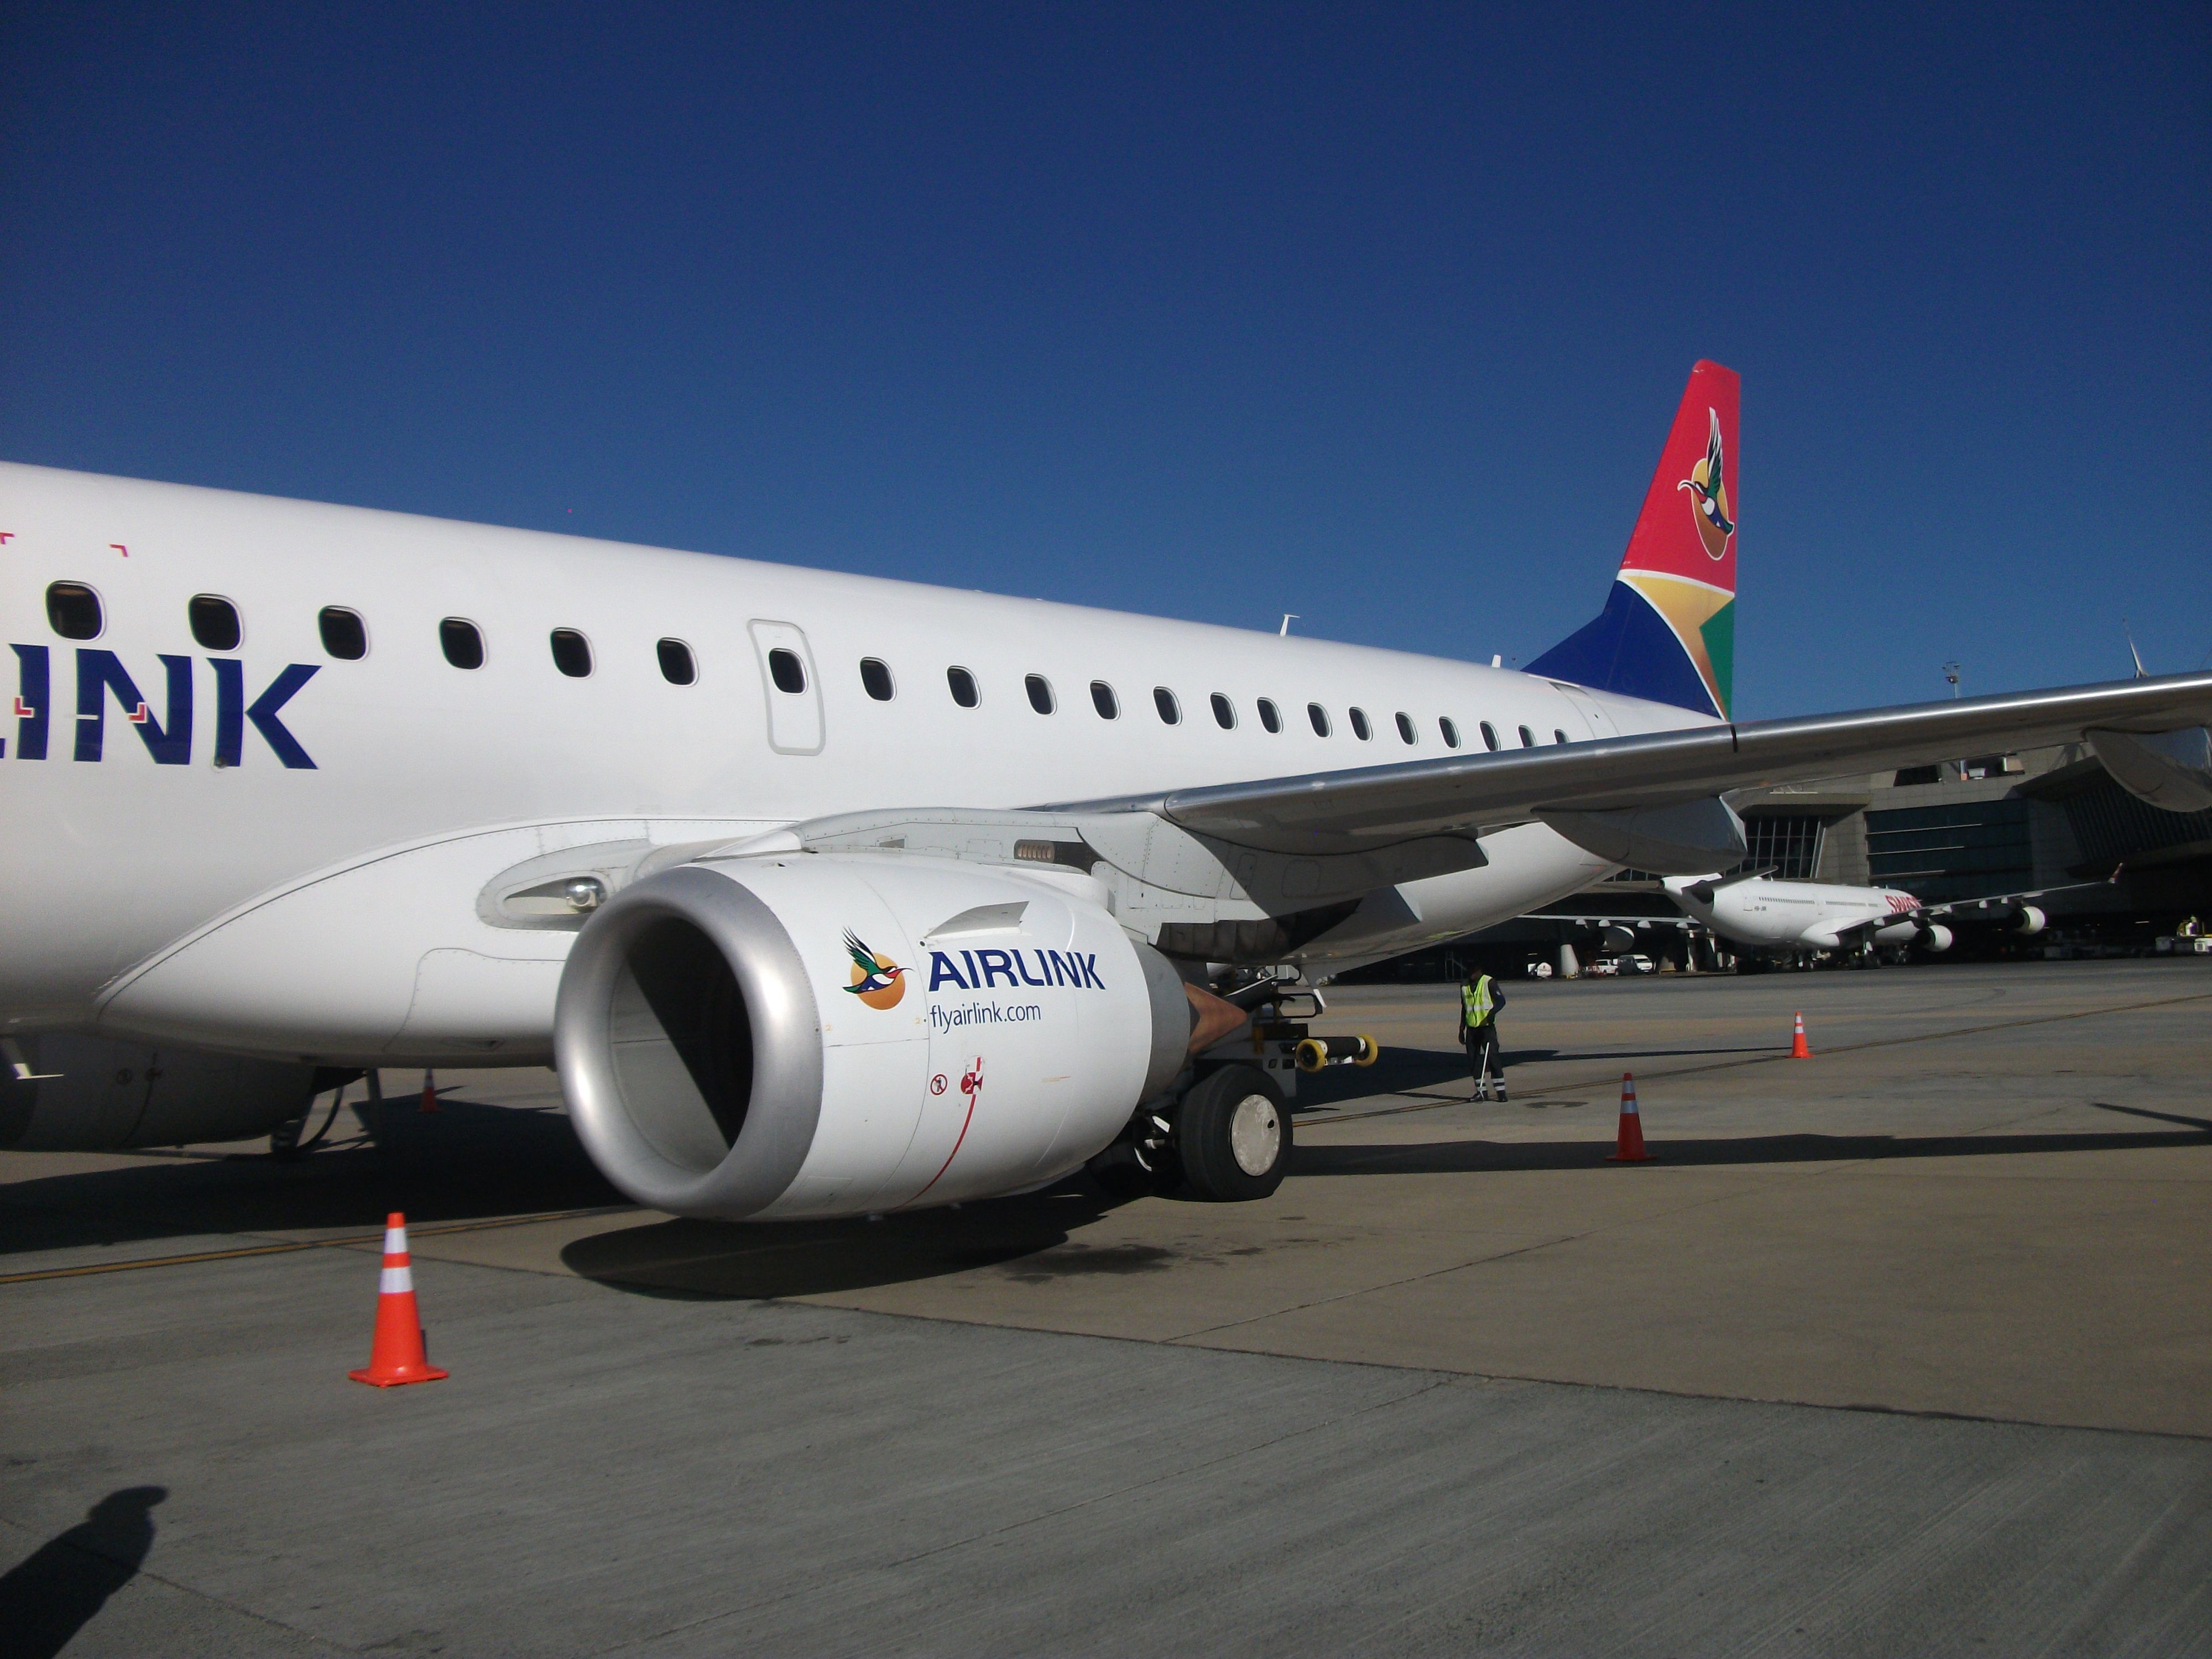 An Airlink Embraer 190 parked at an airport.